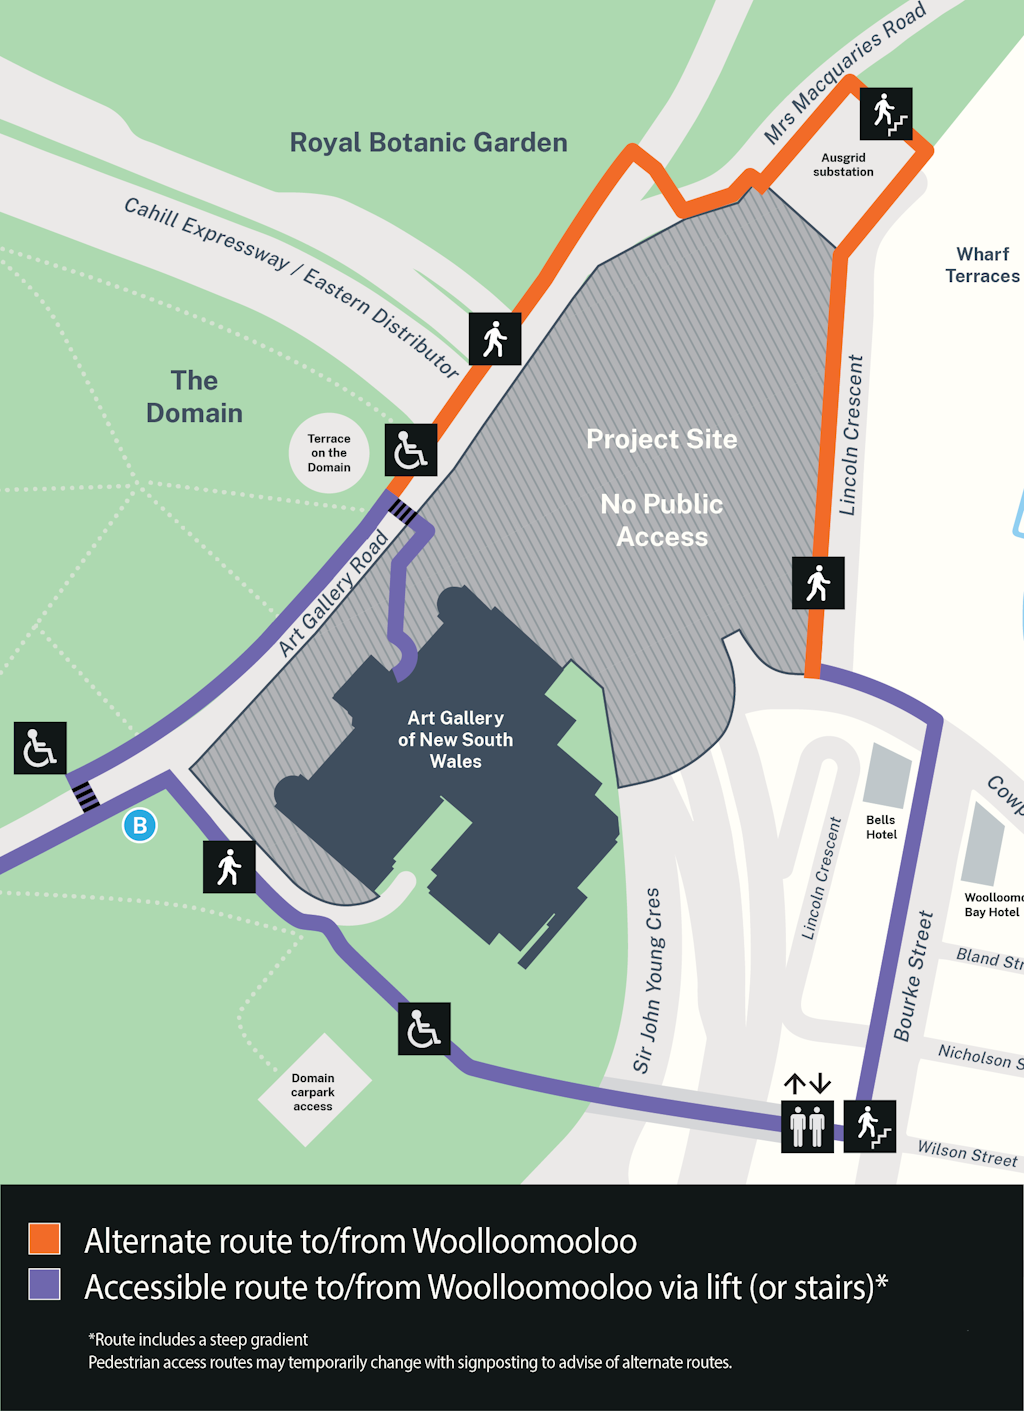 A map of the Art Gallery of New South Wales and its surrounds, with two access routes indicated